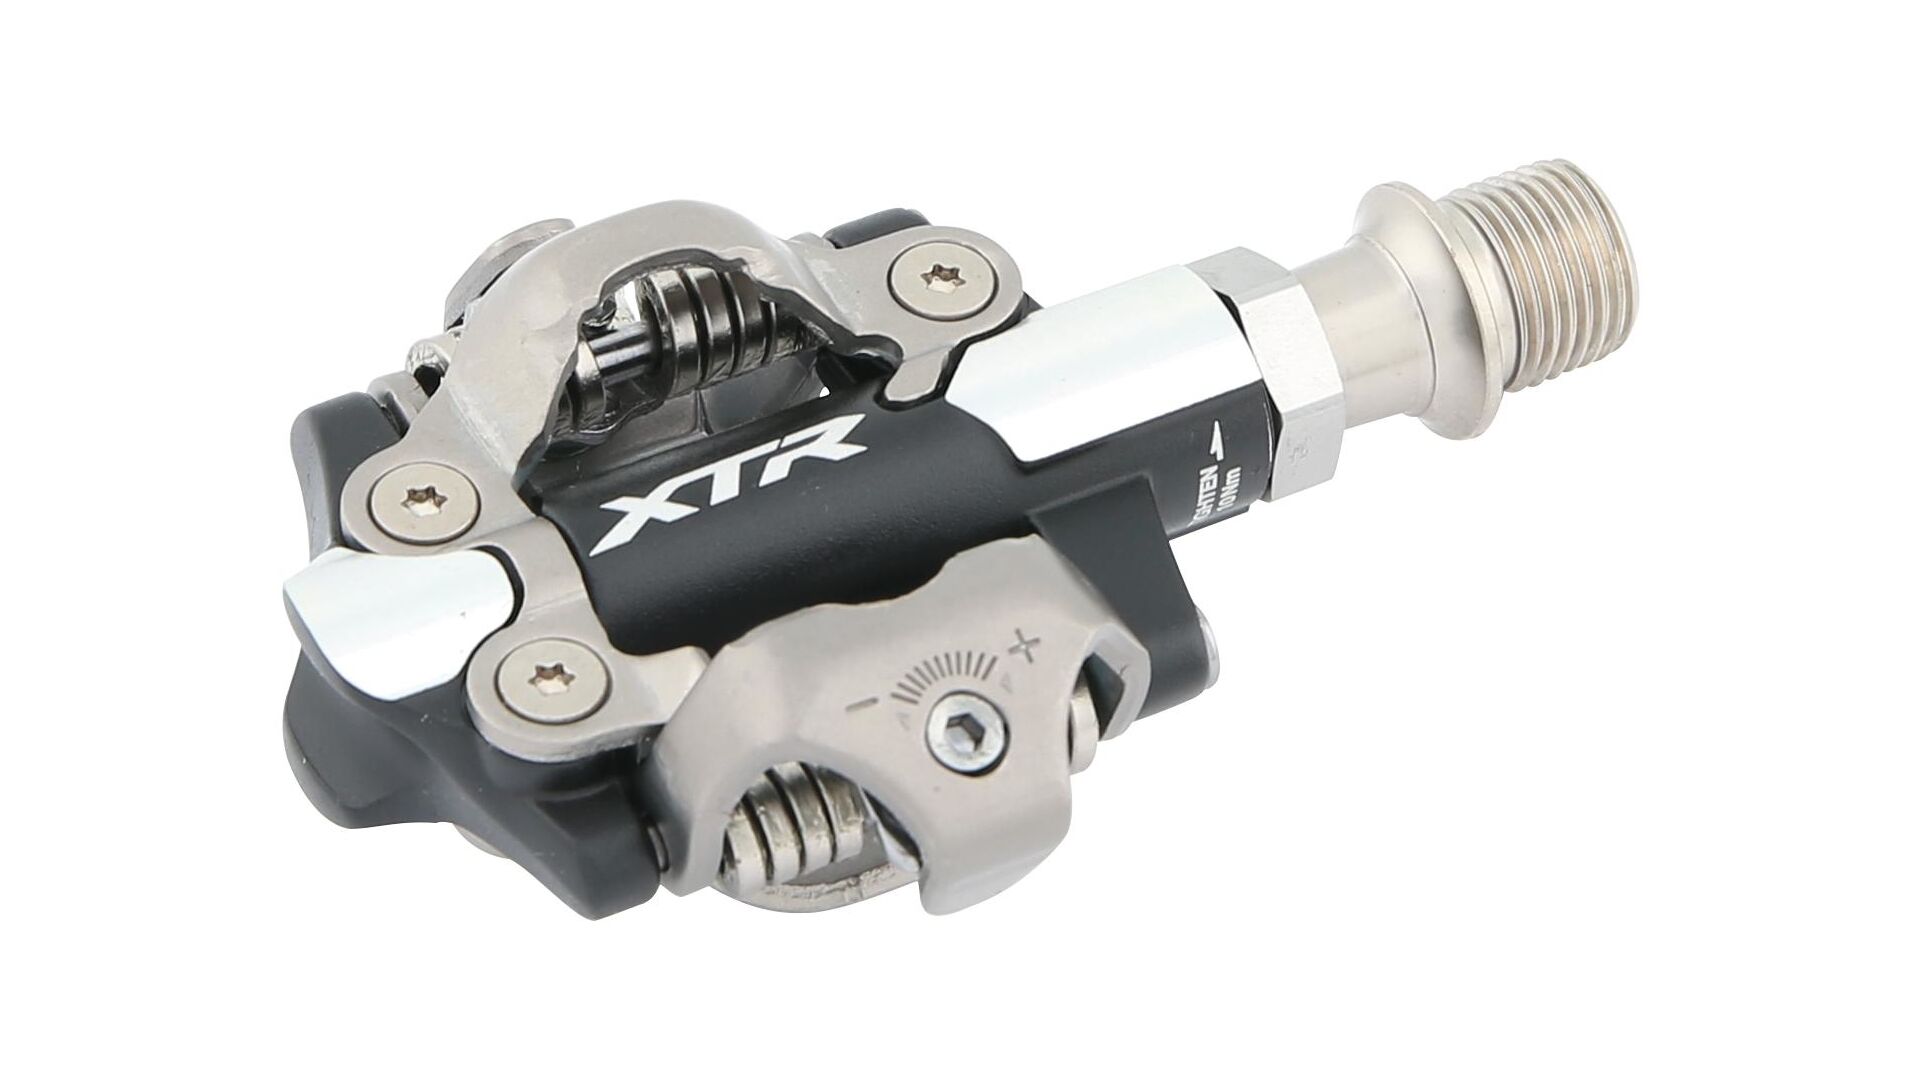 Shimano Systempedal XTR XC Race